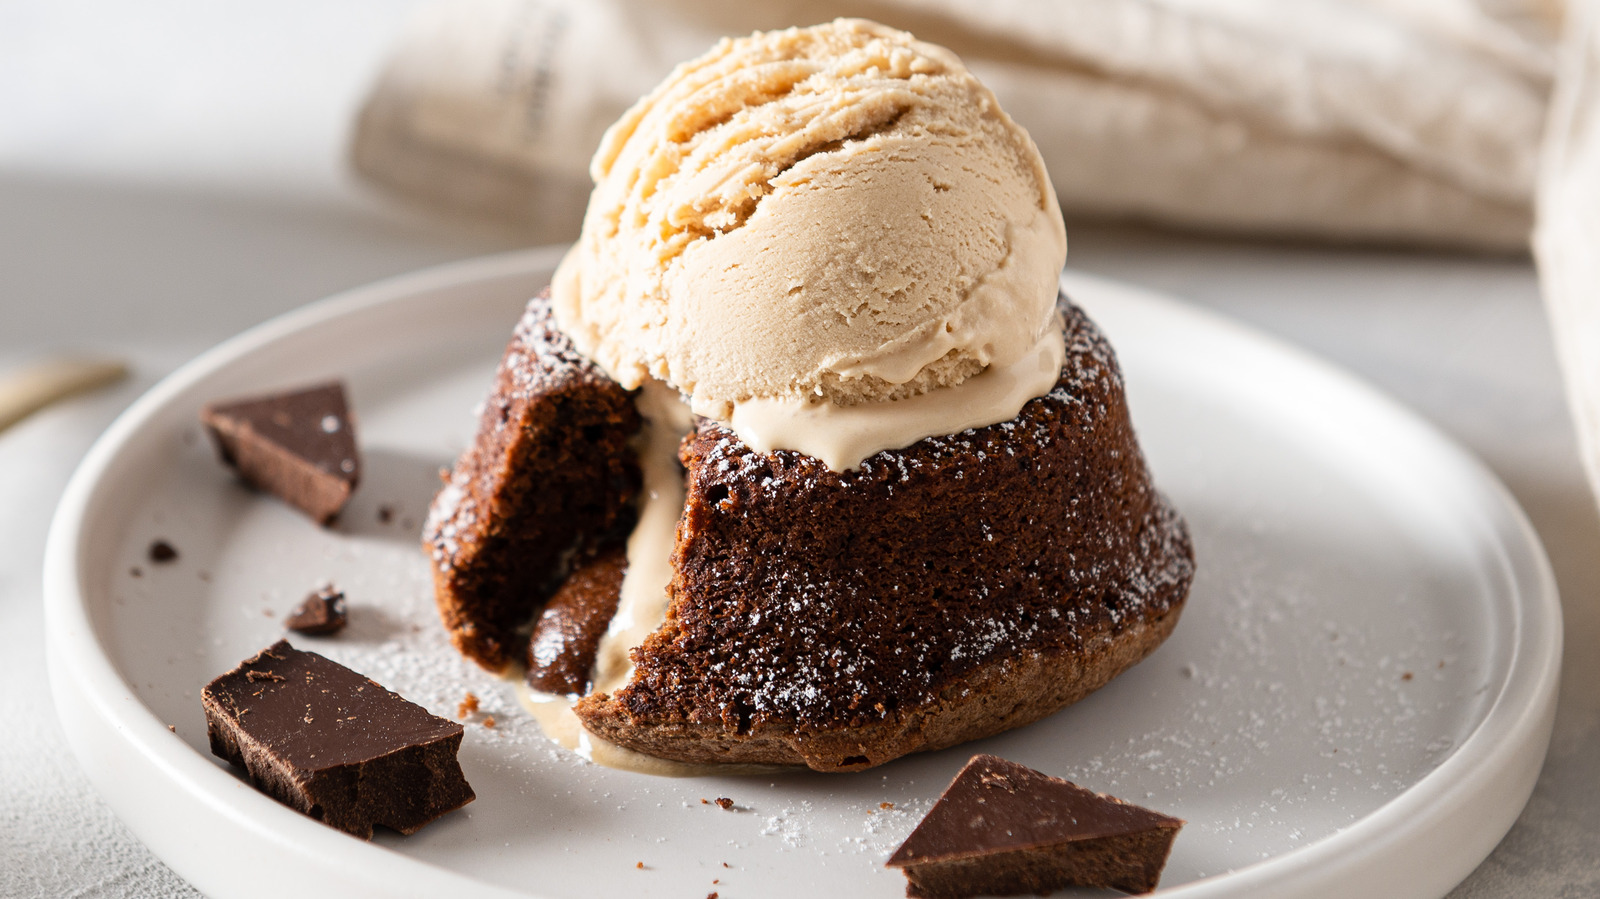 Warm Chocolate Lava Cakes with Bailey's Sauce - Pastries Like a Pro